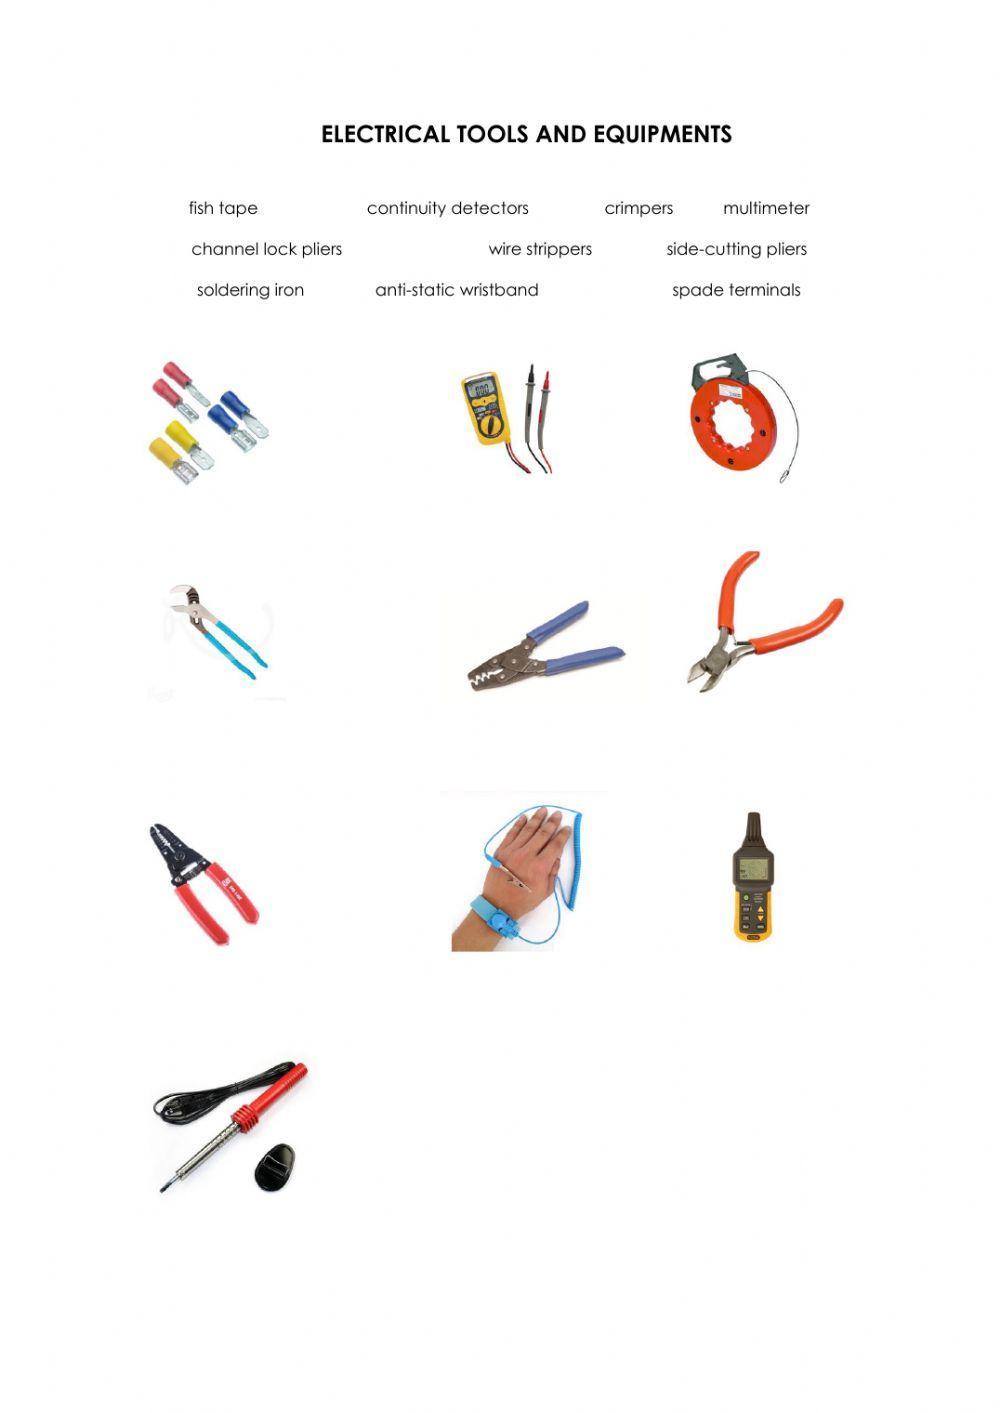 Electrical Tools and Equipment